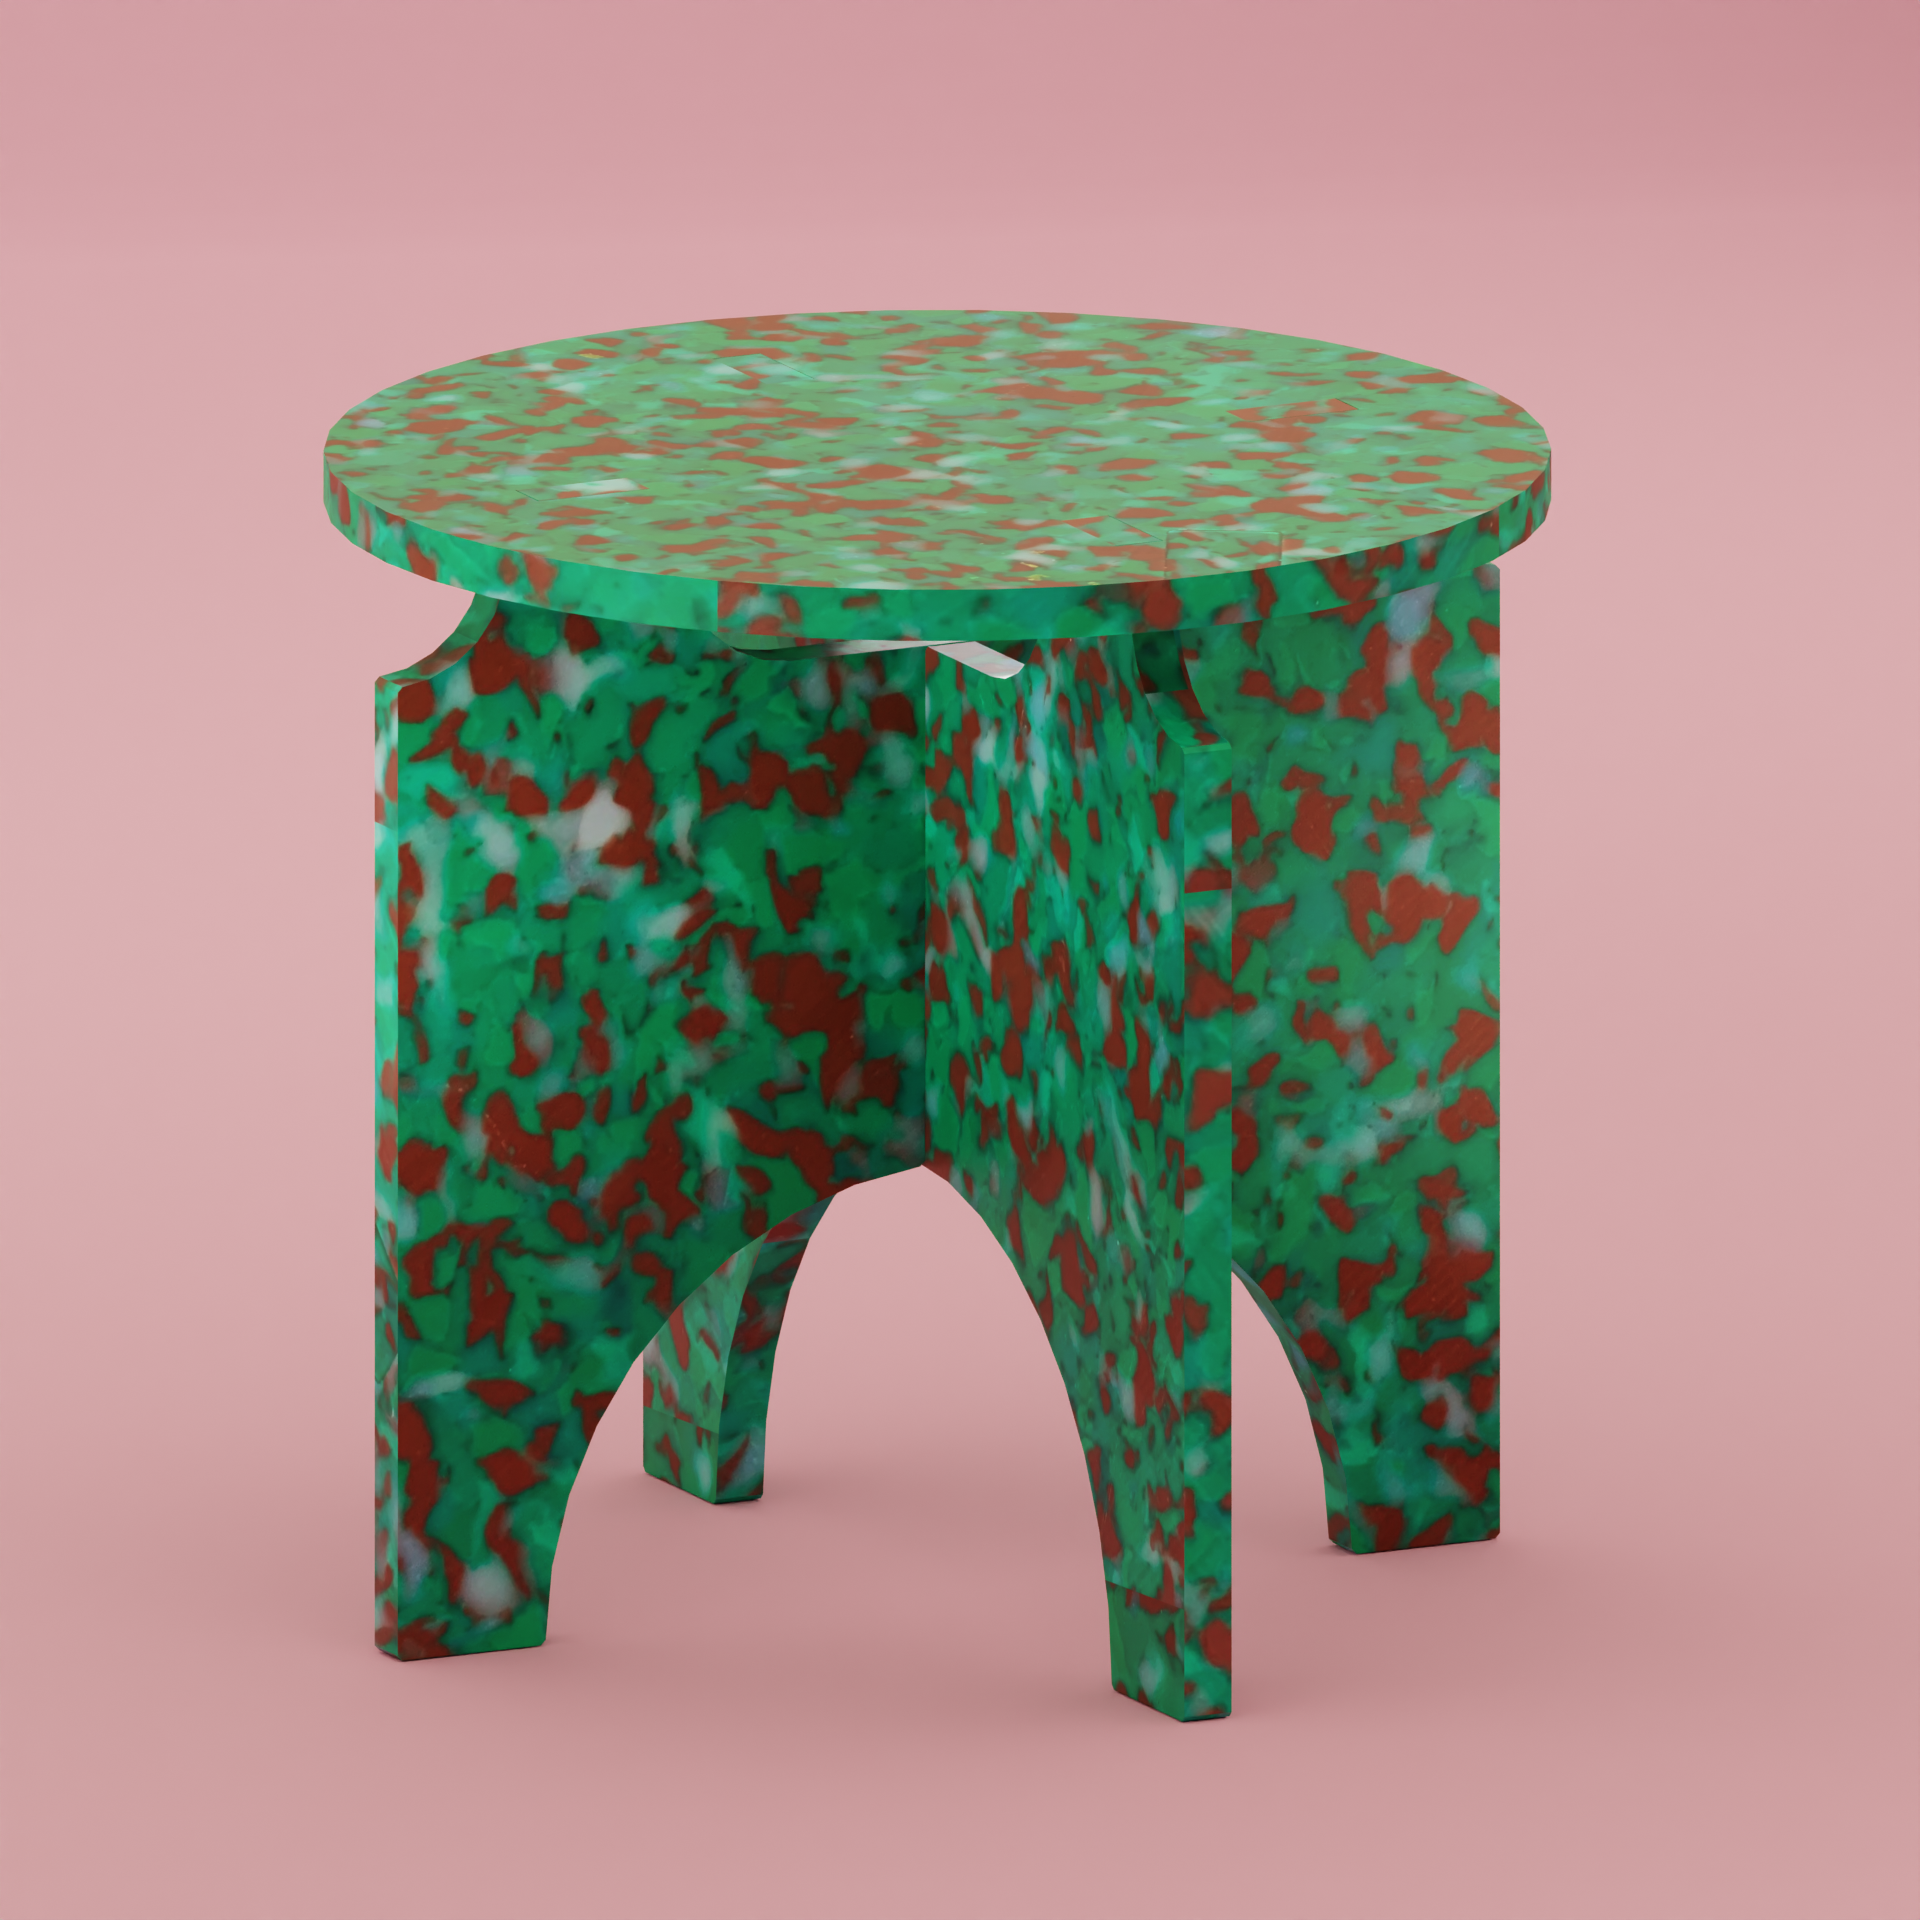 GTEEN ROUND TOP STOOL BY THE MINIMONO PROJECT - BRAND FOR ECO FRIENDLY - PLAYFUL - MULTI FUNCTIONAL - SUSTAINABLE - HIGH QUALITY - DESIGN FURNITURE FROM RECYCLED PLASTIC FOR BOTH ADULT AND CHILDREN MADE IN BERLIN GERMANY